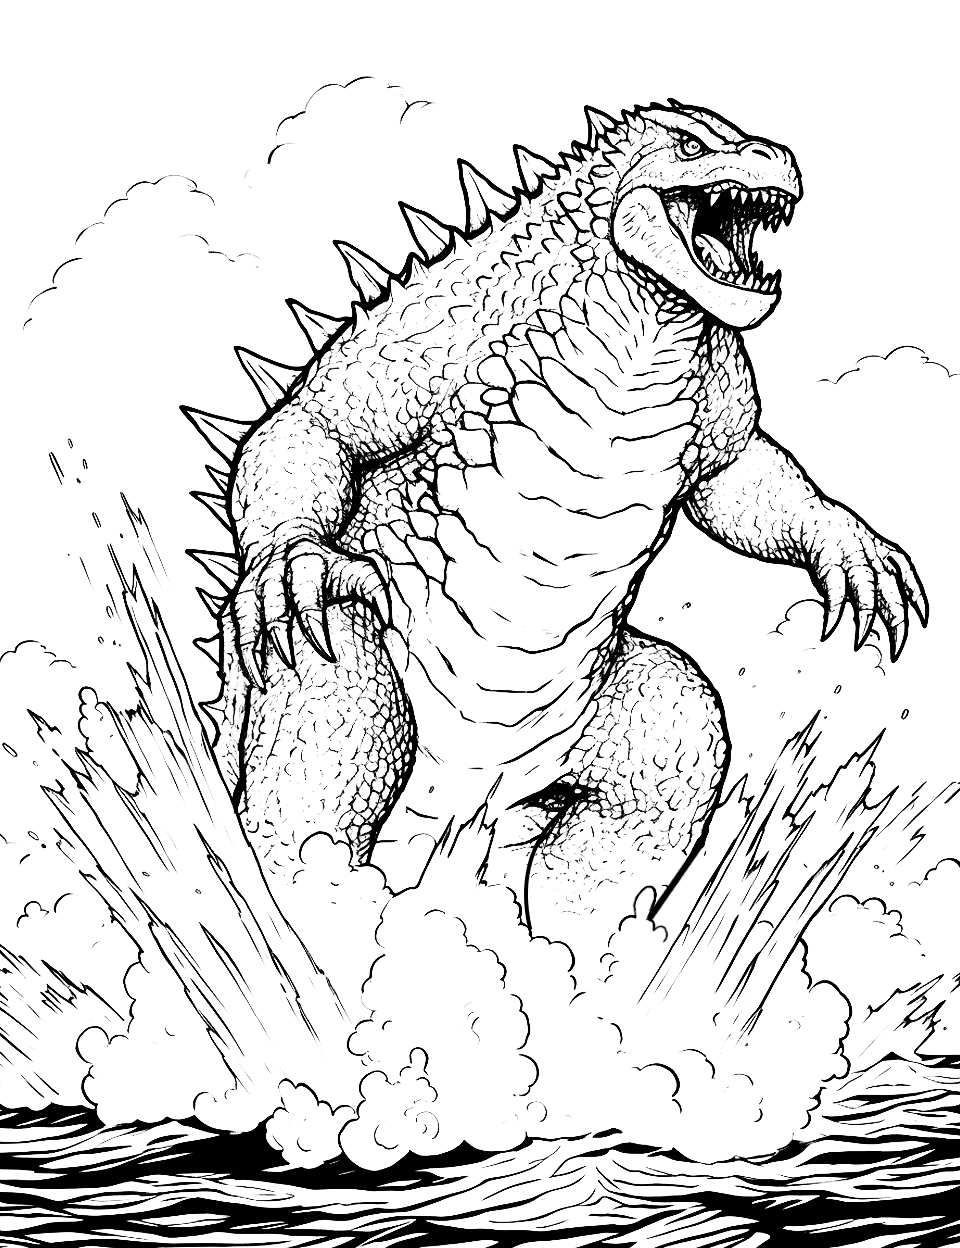 Godzilla's Ocean Entrance Coloring Page - Godzilla emerging from the ocean, water splashing around.